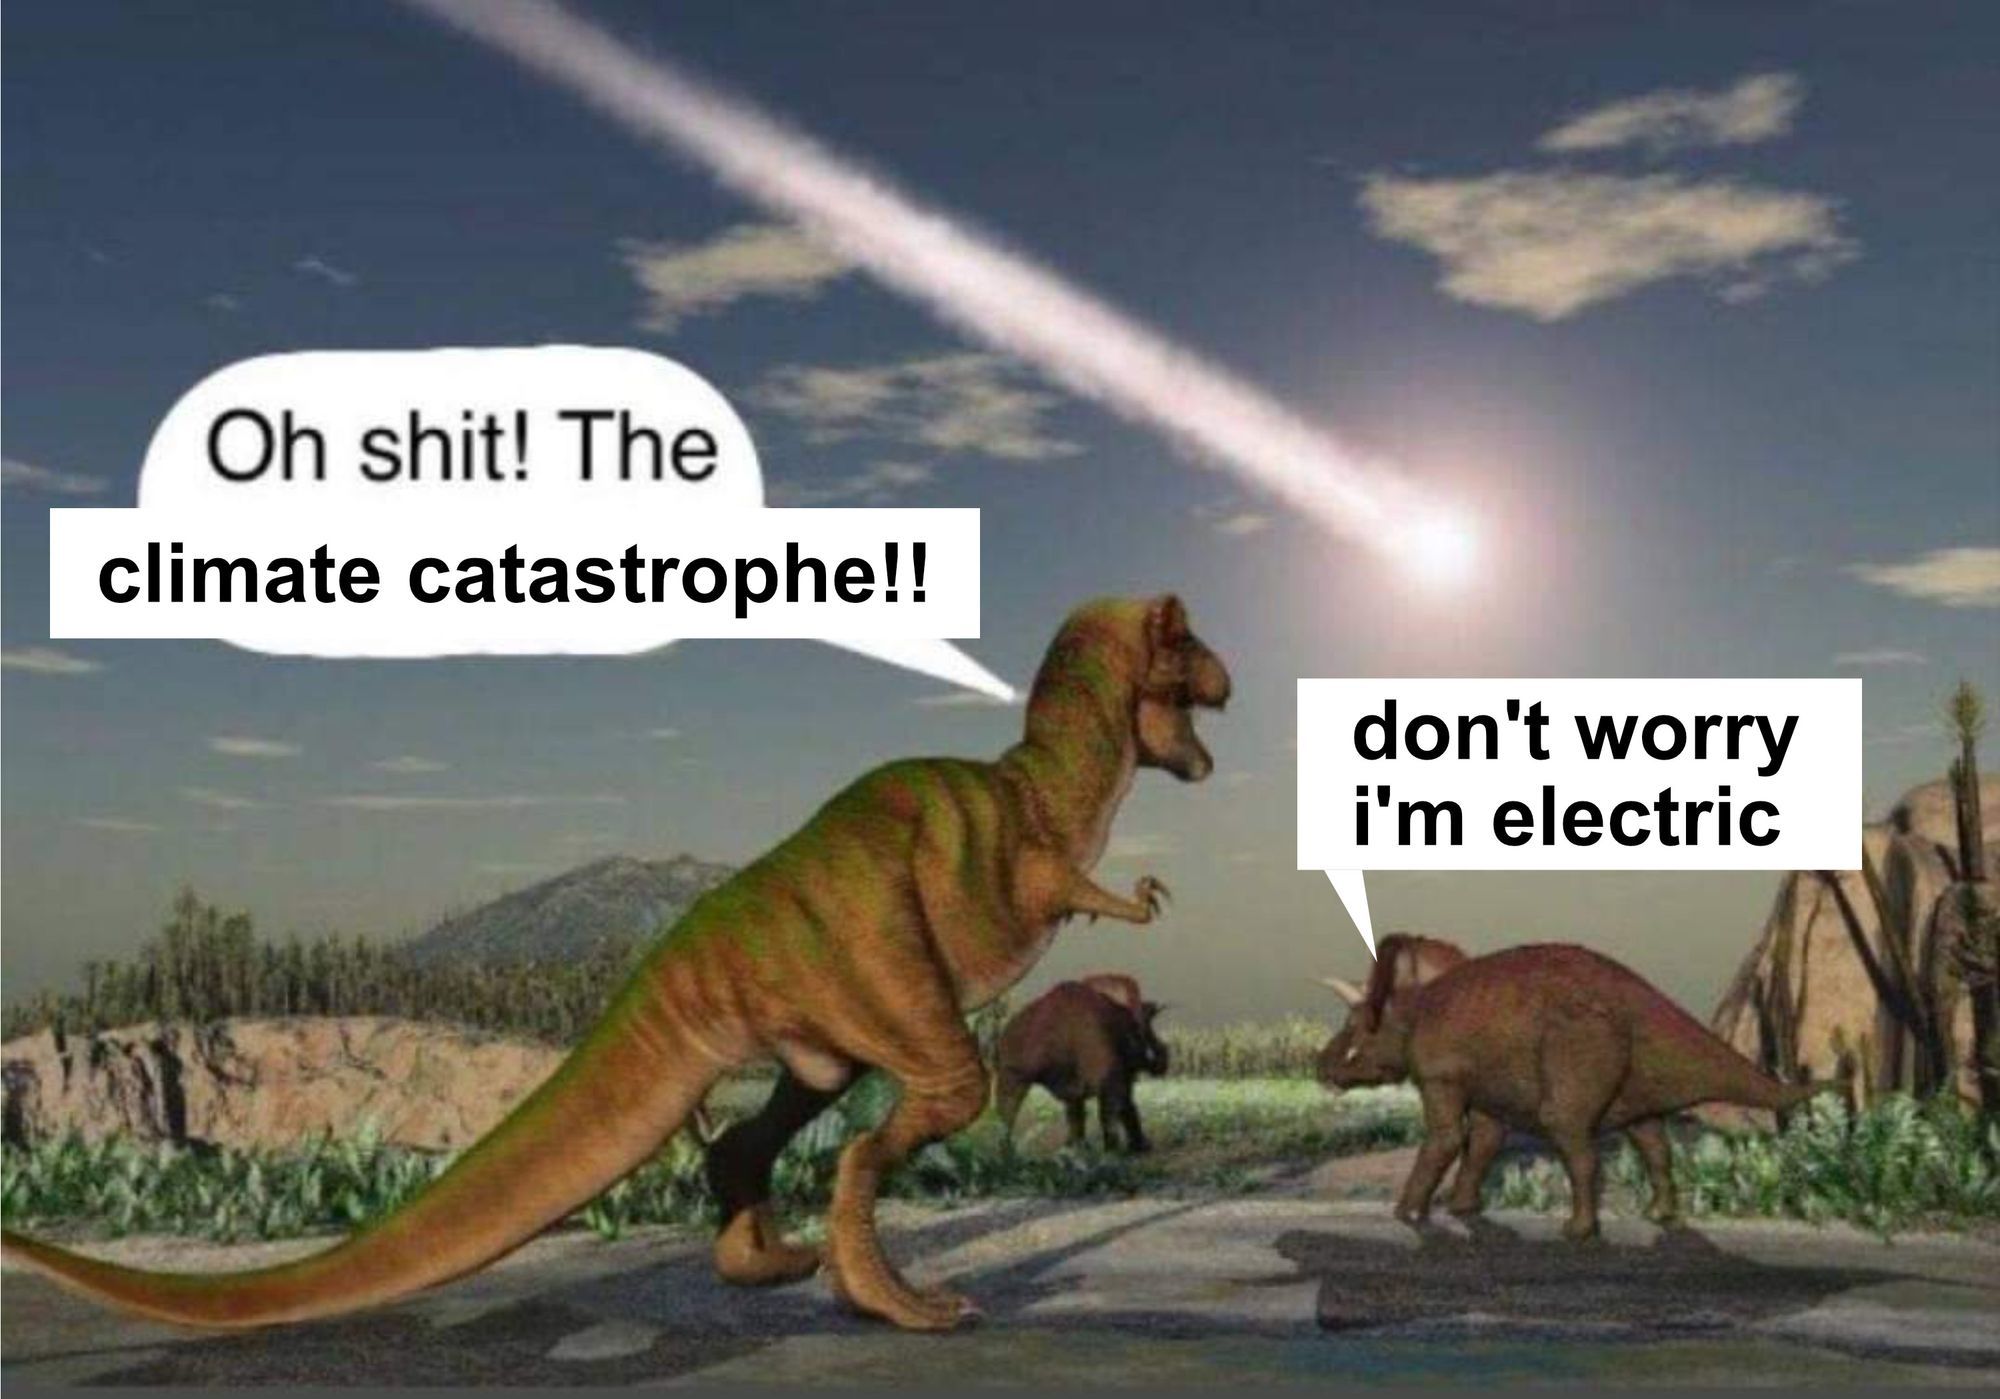 Cars Are Dinosaurs And Electric Dinosaurs Won't Help